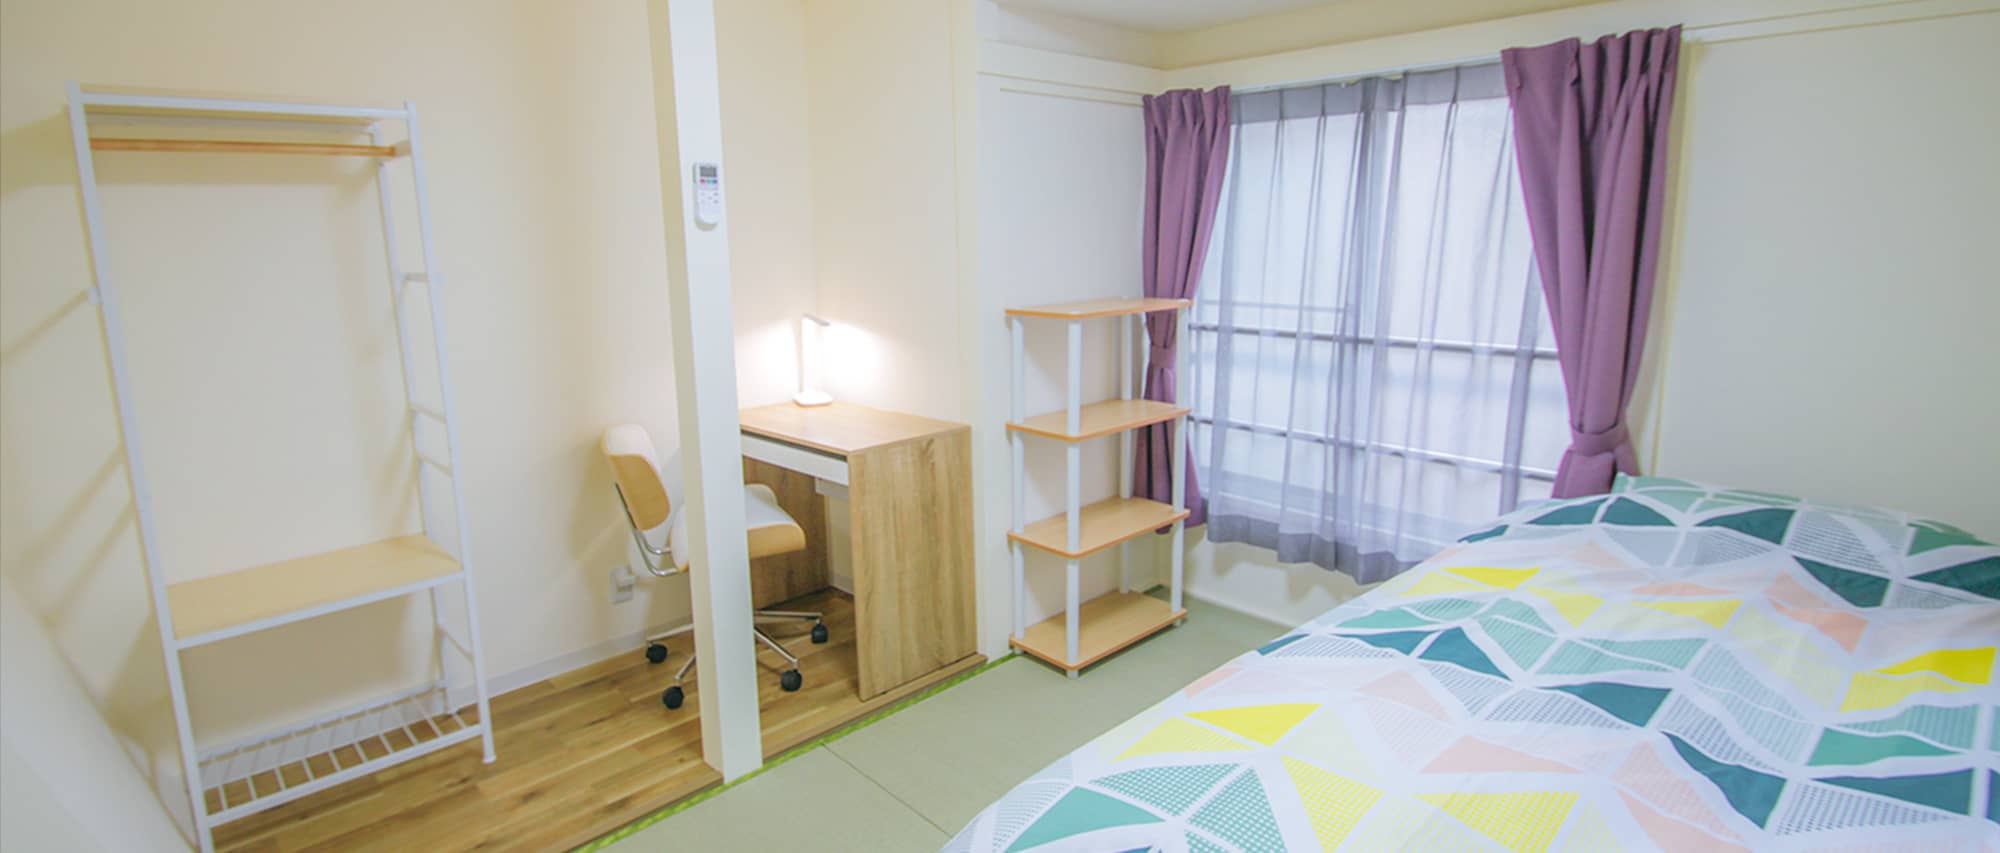 Sakura House Furnished Guest Houses Apartments Share